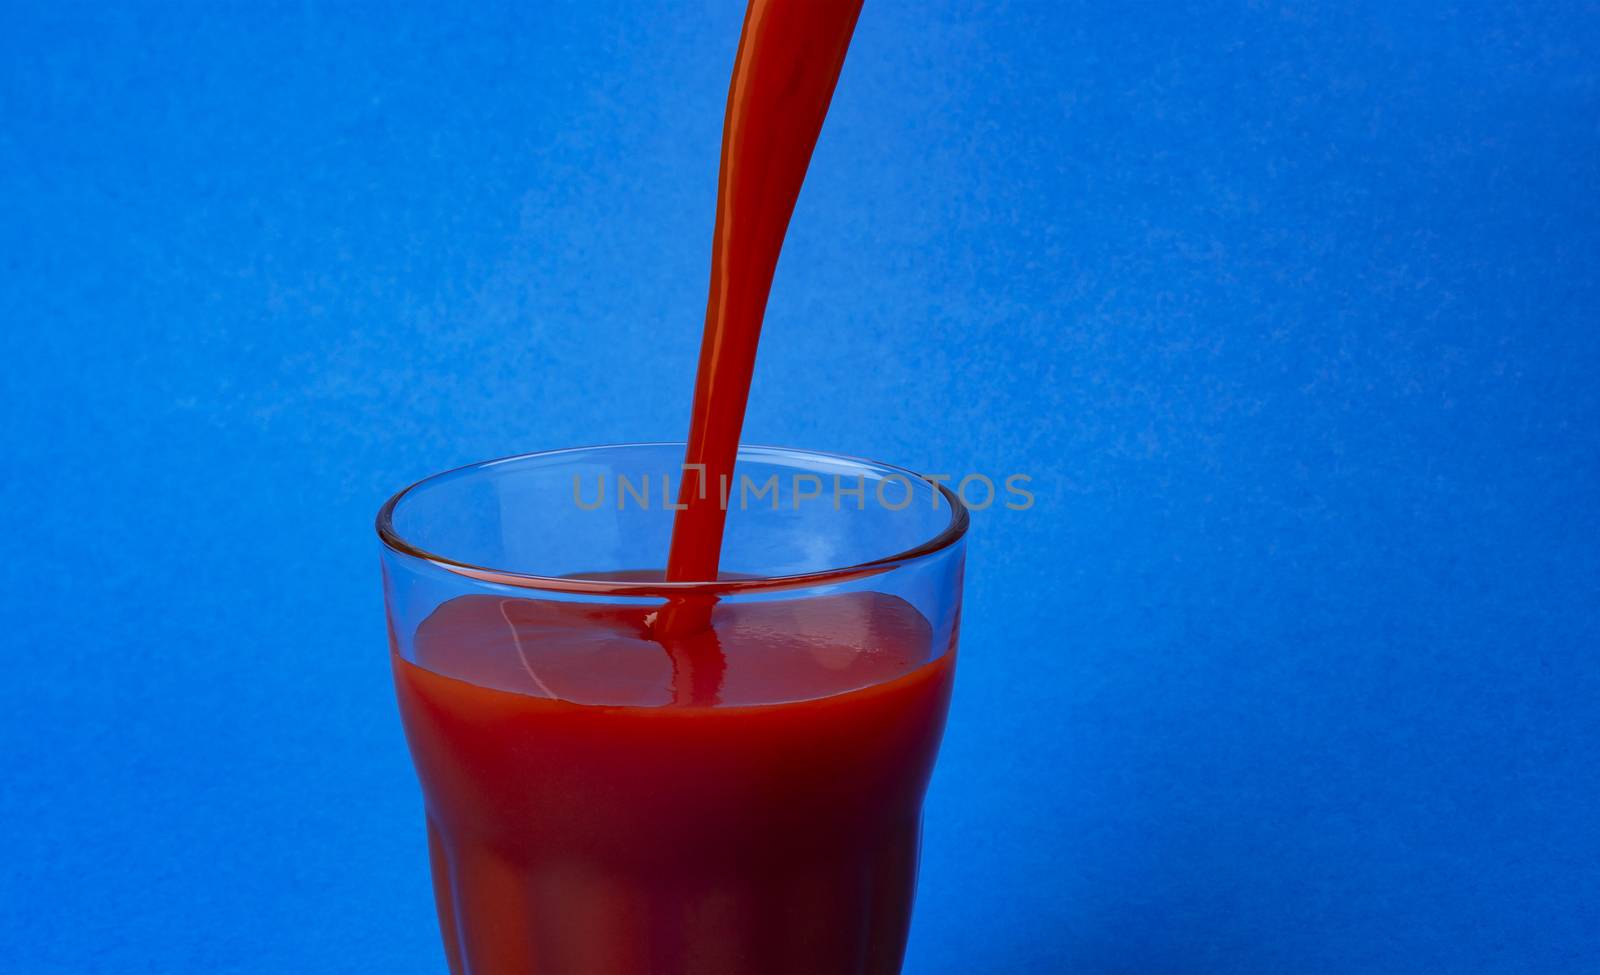 Tomato juice pouring into glass, isolated on blue background, with copy space by xamtiw